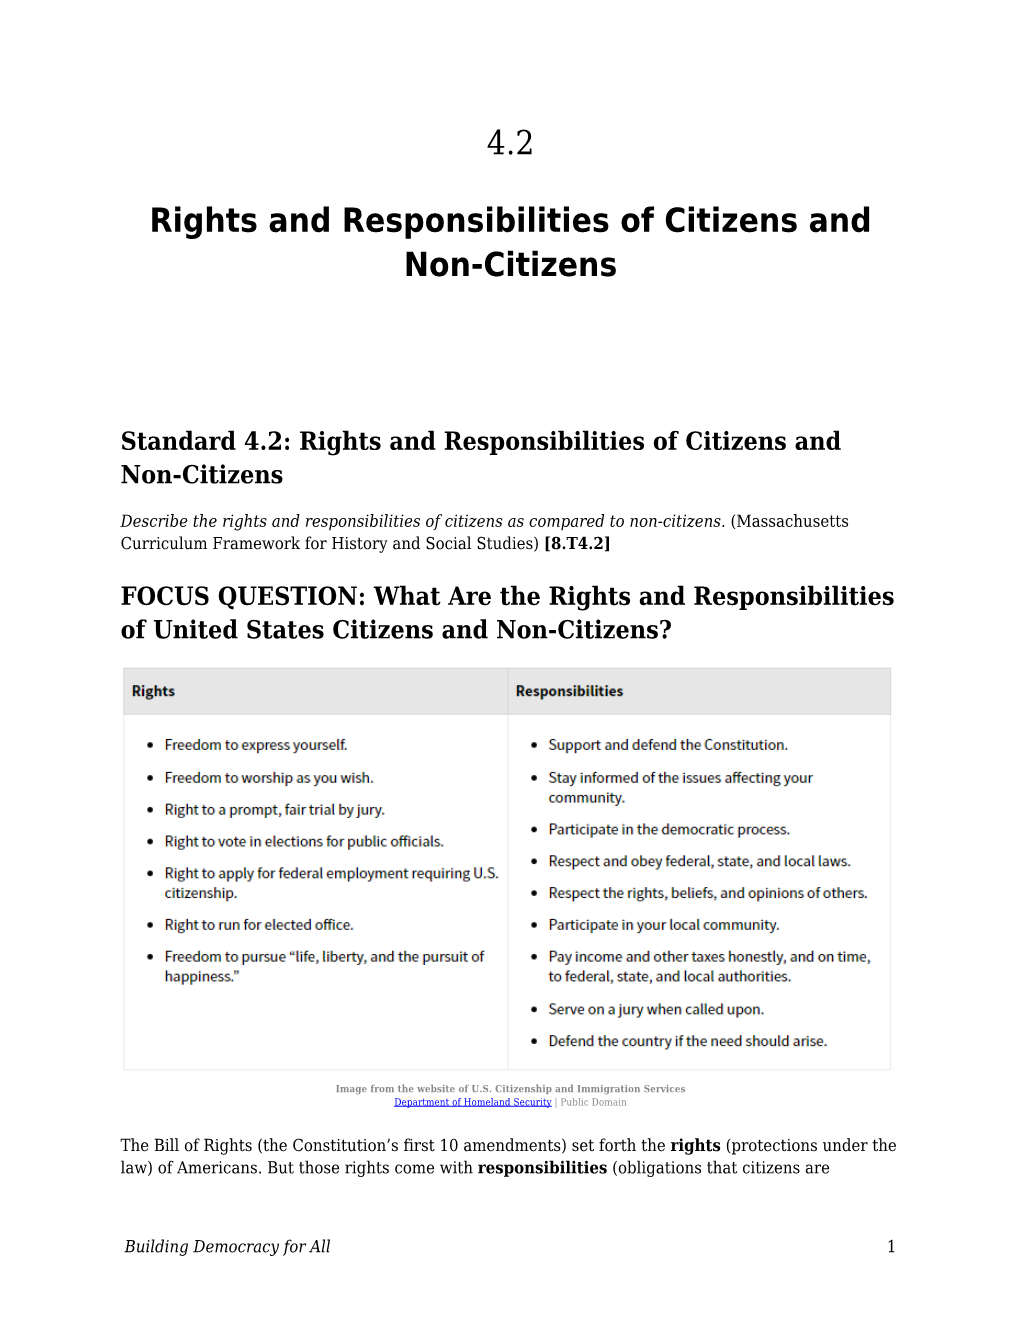 Rights and Responsibilities of Citizens and Non-Citizens